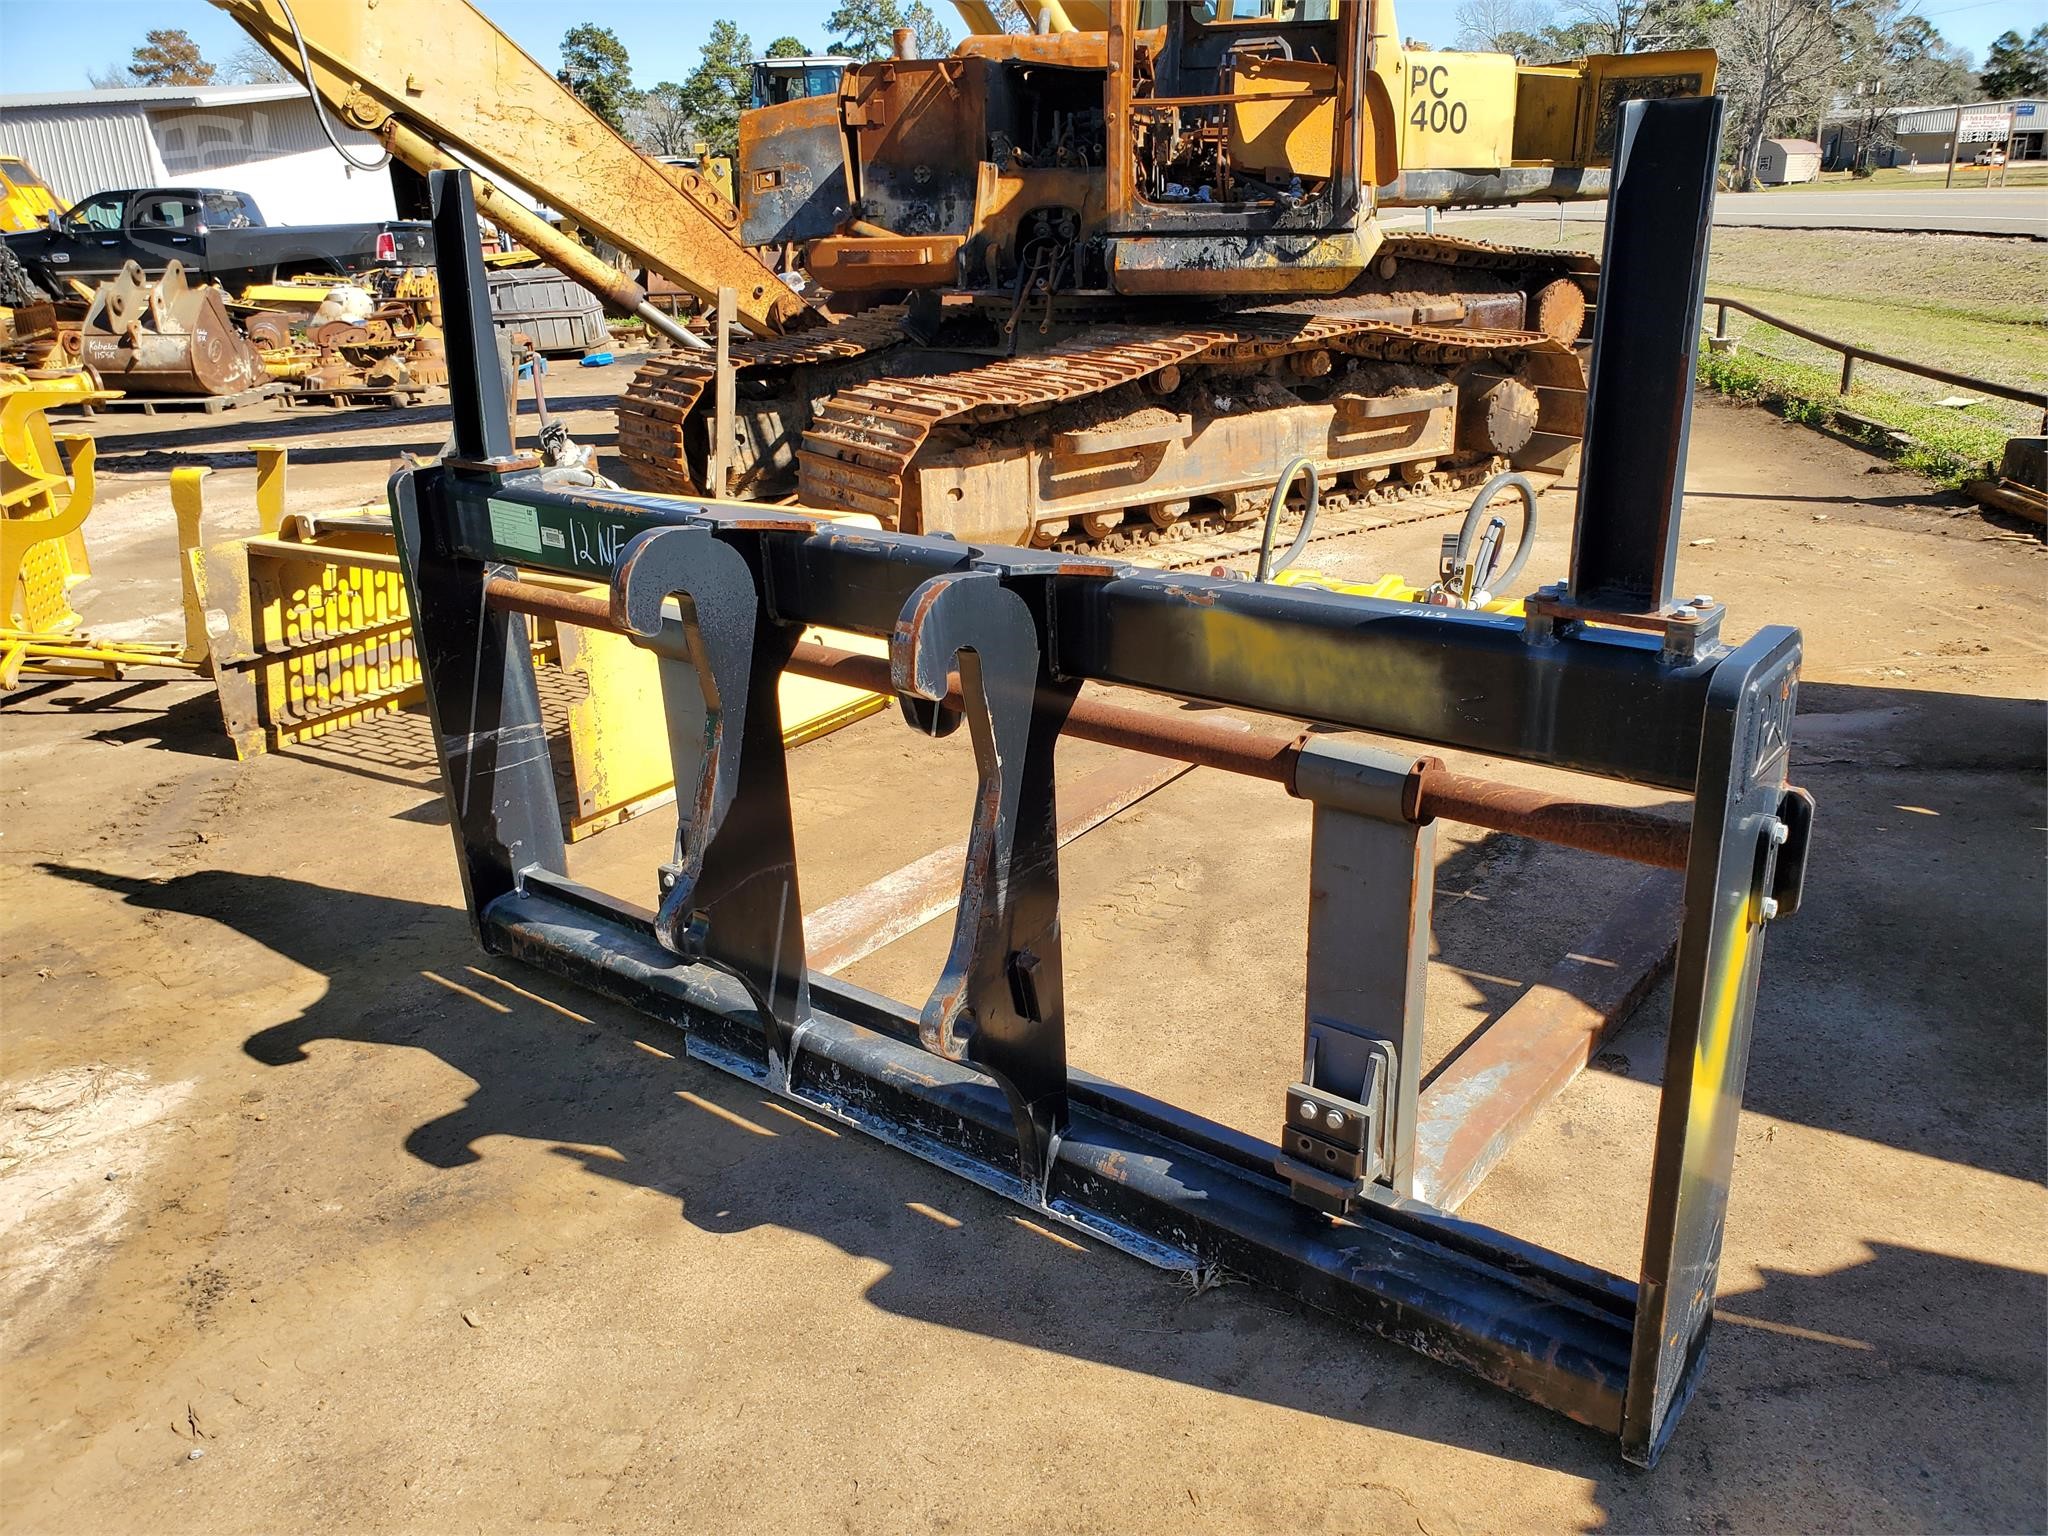 CATERPILLAR 924G/930G For Sale in Coldspring, Texas | MachineryTrader.com